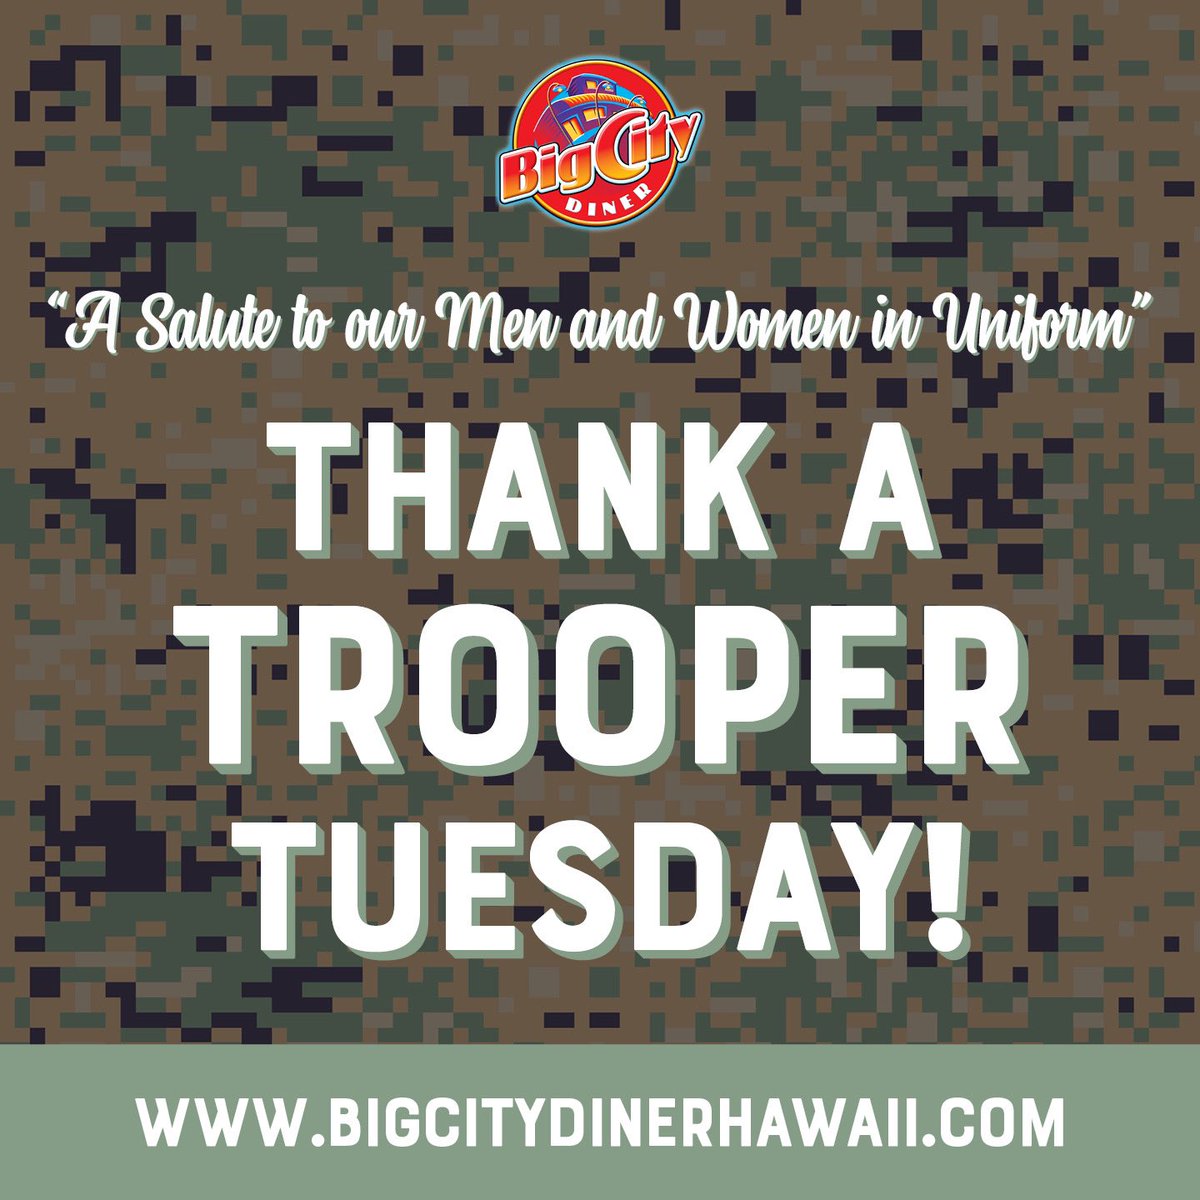 TUESDAY is 'THANK a TROOPER🇺🇸TUESDAY' at @BigCityDiner at #Pearlridge @WindwardMall @WaipioCenter @KailuaNEWS  & @KaimukiHi where ACTIVE DUTY🎖️MILITARY get 15% OFF your DINE-IN Entrée with a Beverage Purchase/pp #Kaimuki #WaipioCenter #WindwardMall #Hawaii